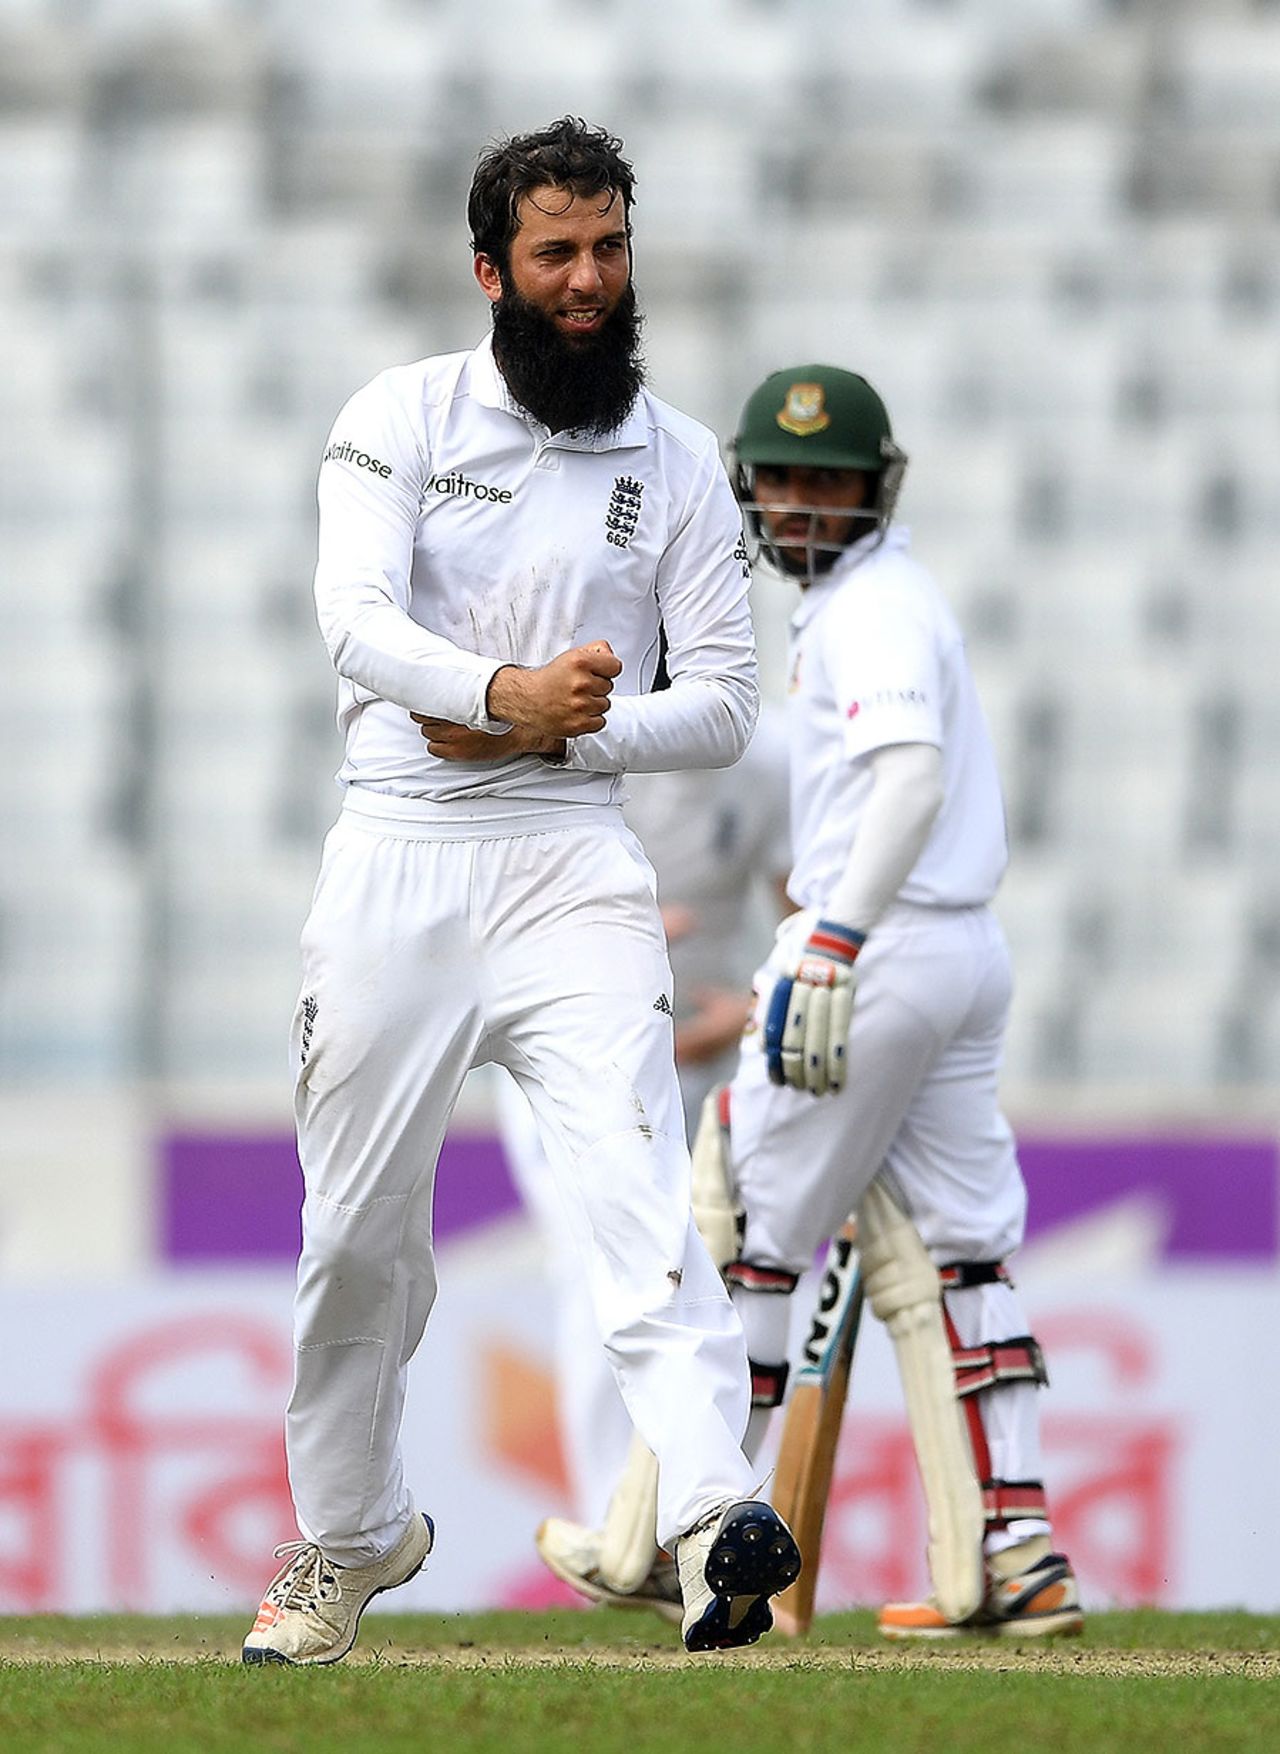 Moeen Ali claimed the big wicket of Tamim Iqbal for 104, Bangladesh v England, 2nd Test, Mirpur, 1st day, October 28, 2016